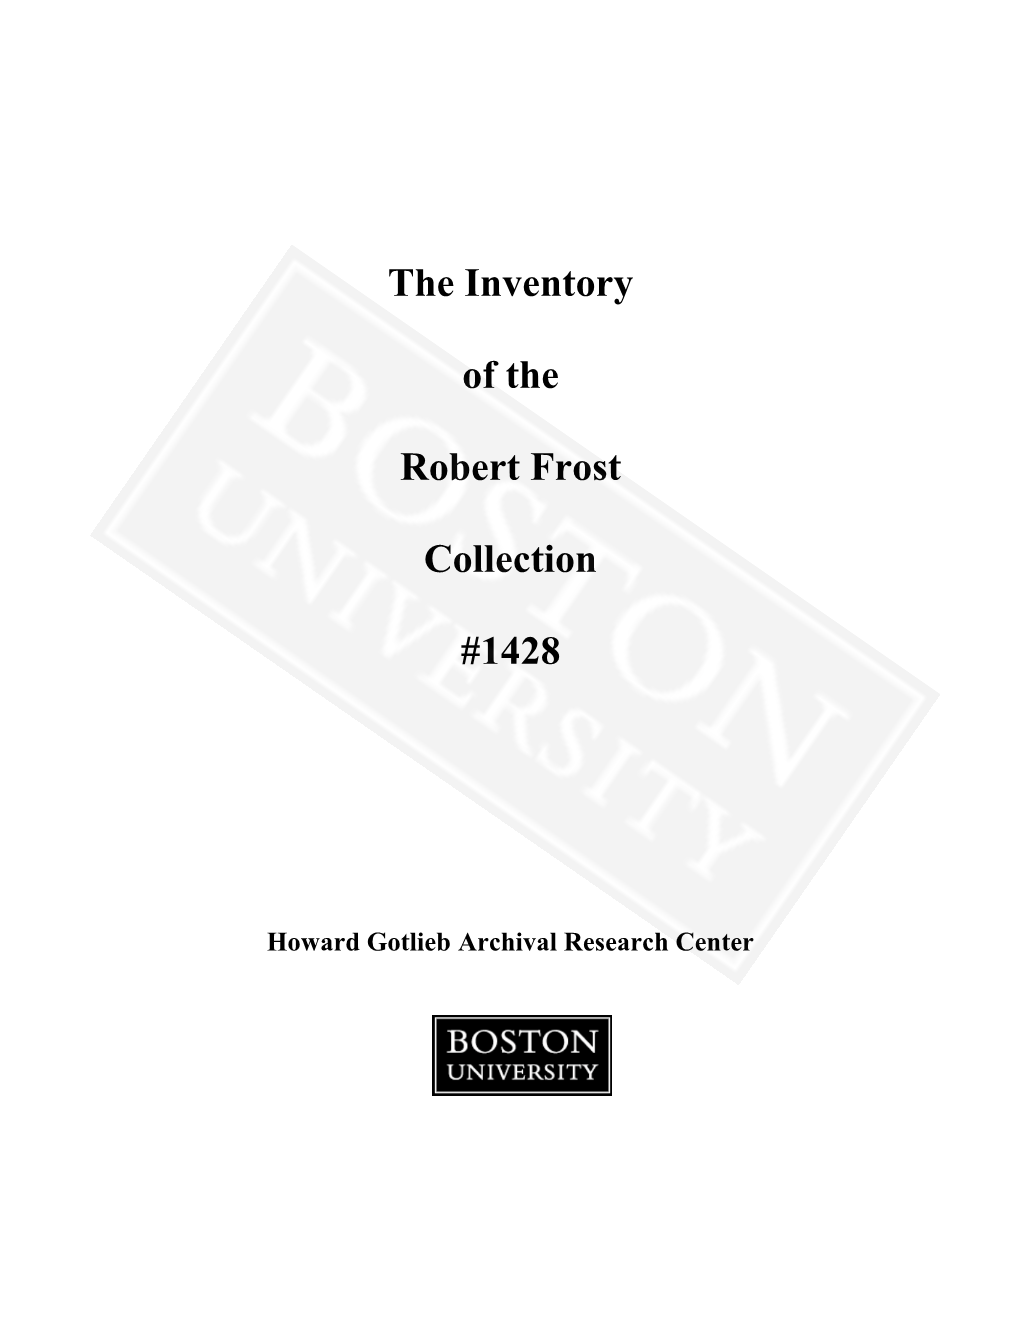 The Inventory of the Robert Frost Collection #1428